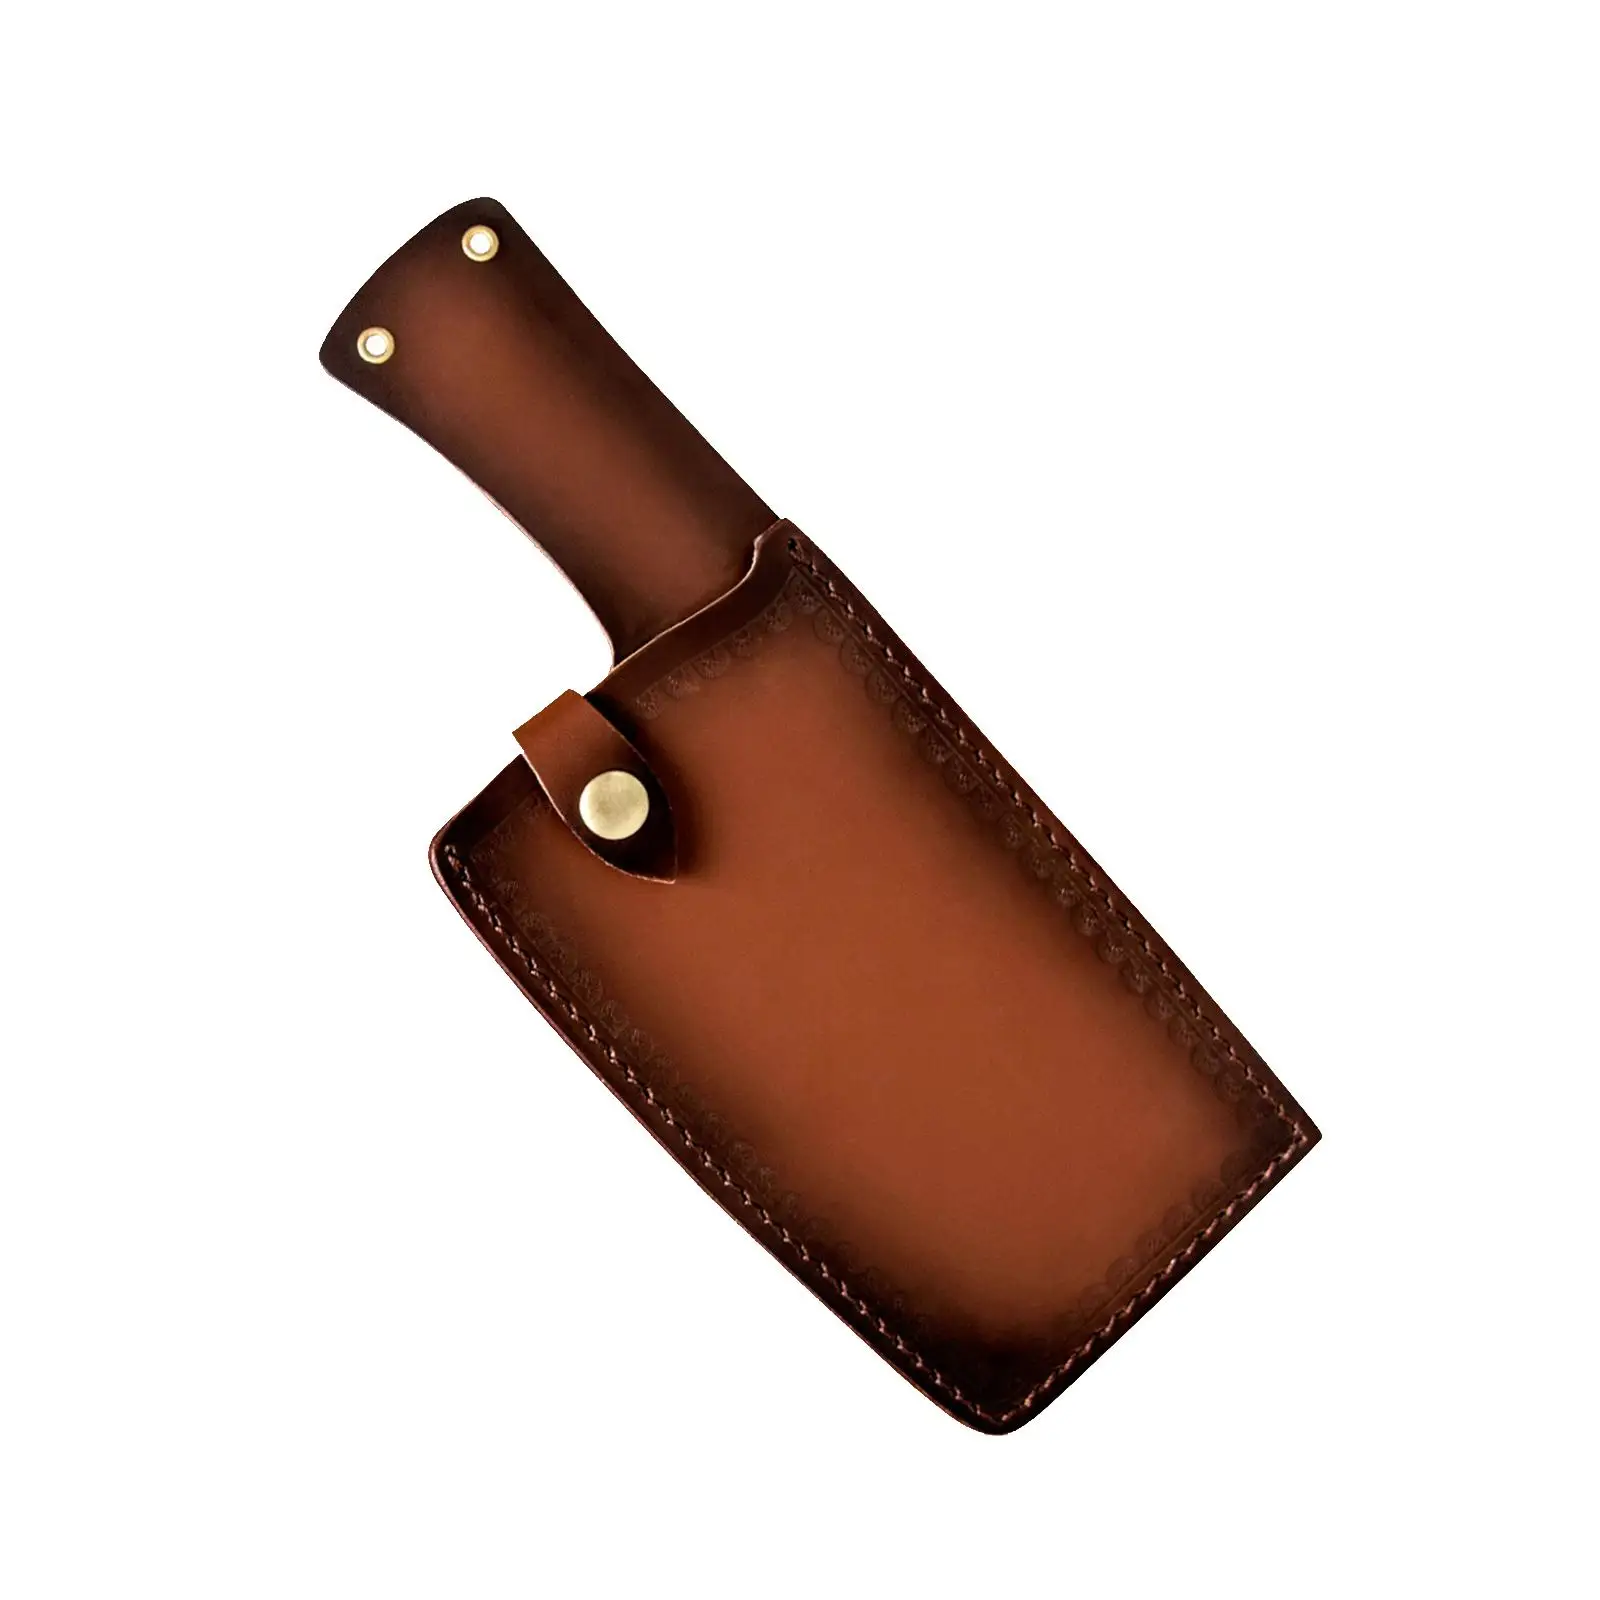 Cutter Sheath Protector, Cleaver Sheath, Durable Universal PU Leather Reusable Knife Sleeve, Cutter Protective Cover